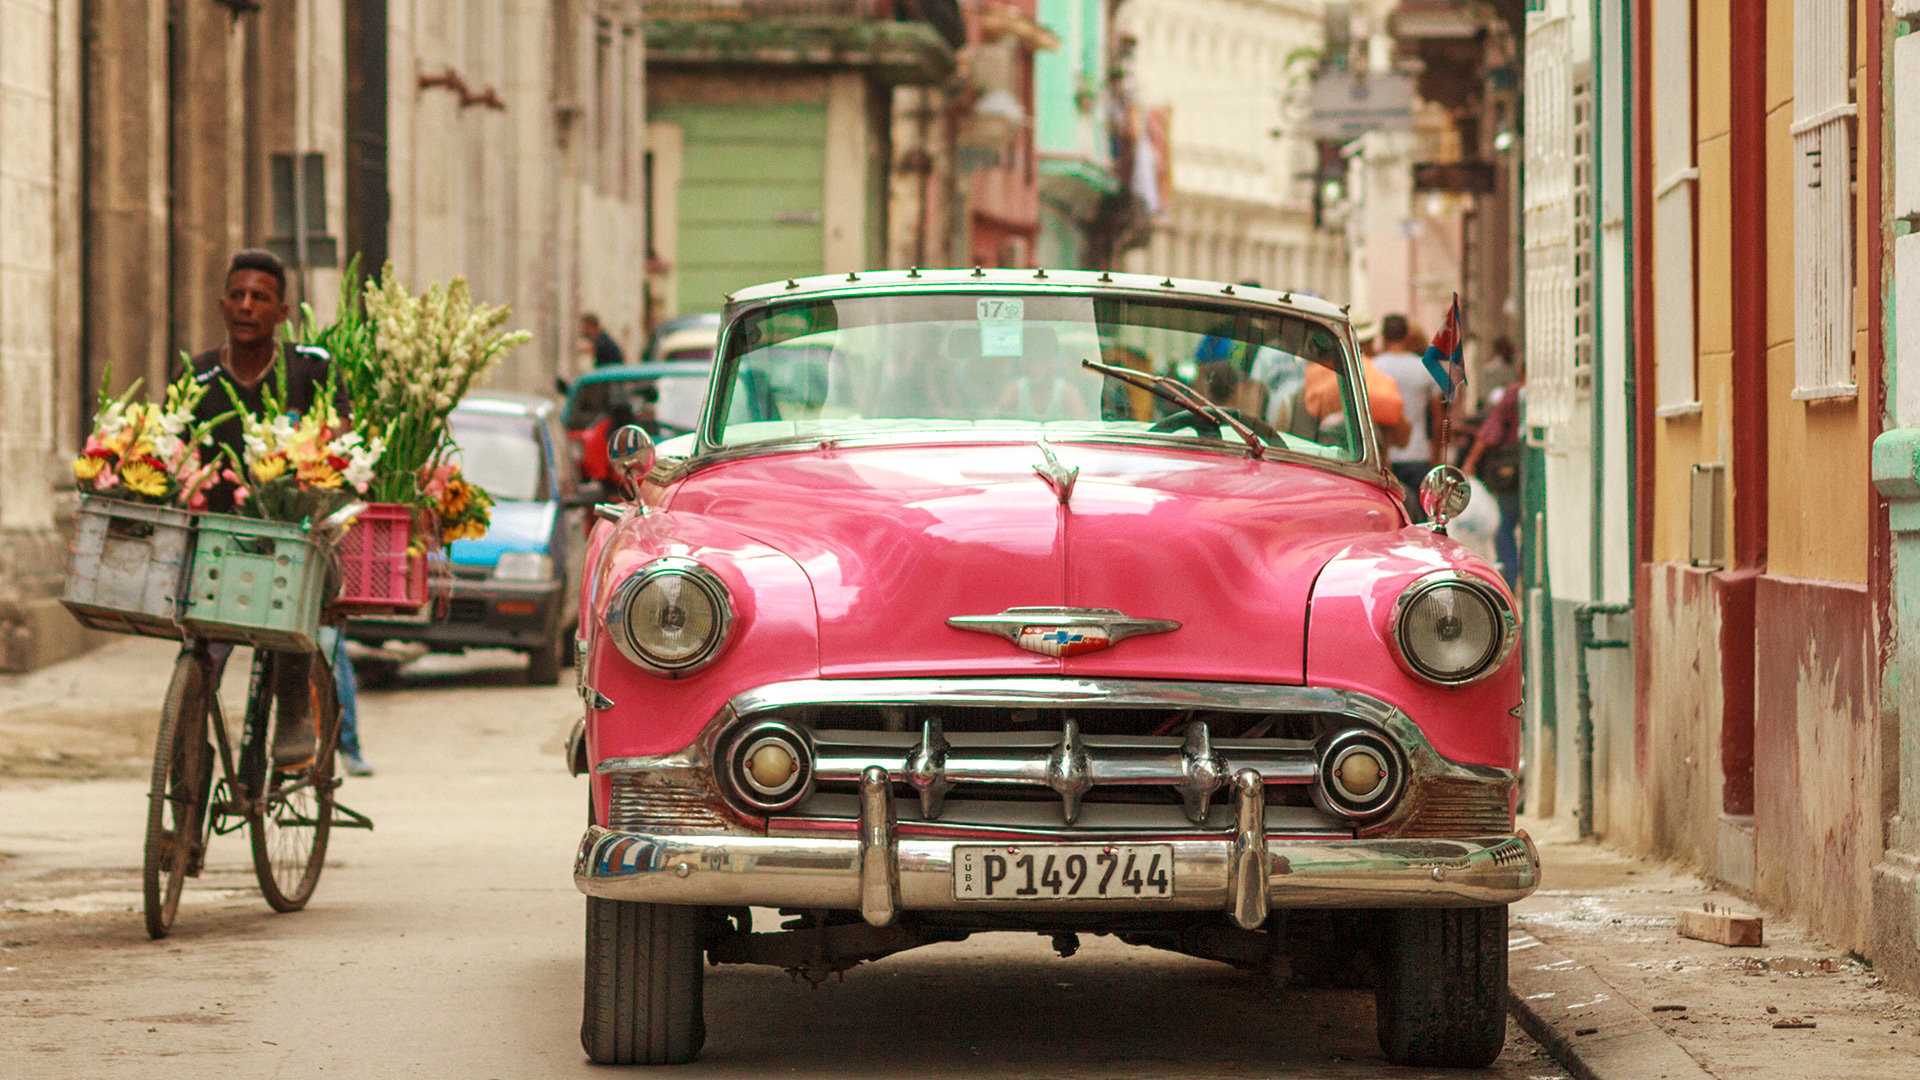 Discover Colonial Havana & cruise in an vintage car